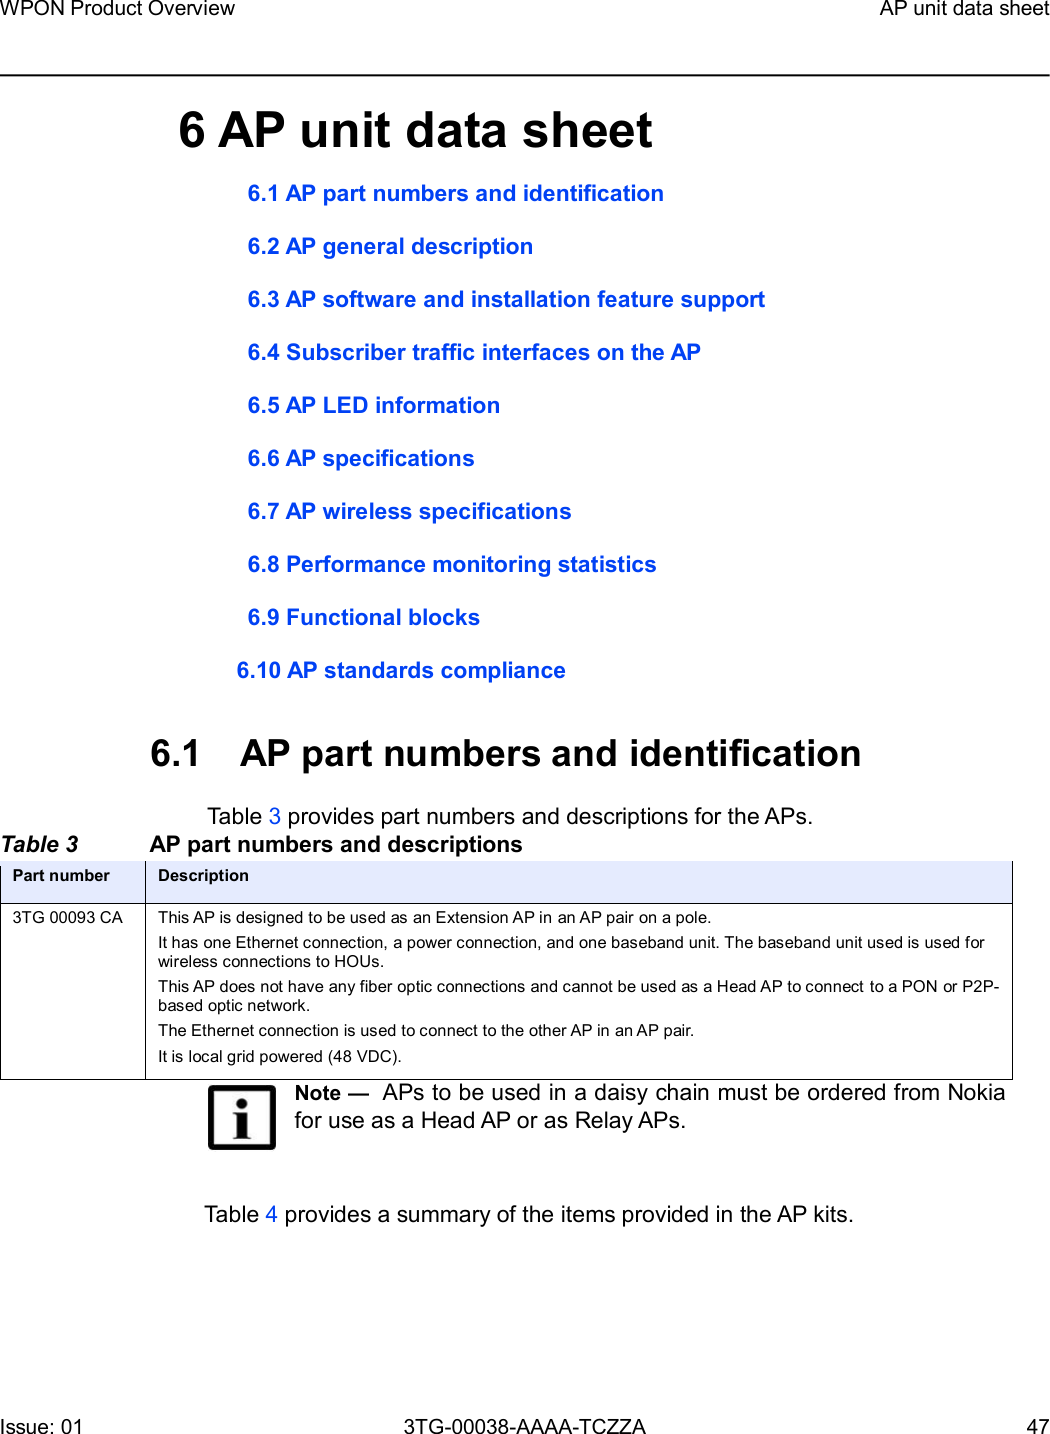 Page 47 of Nokia Bell 7577WPONAPED WPON User Manual WPON Product Overview